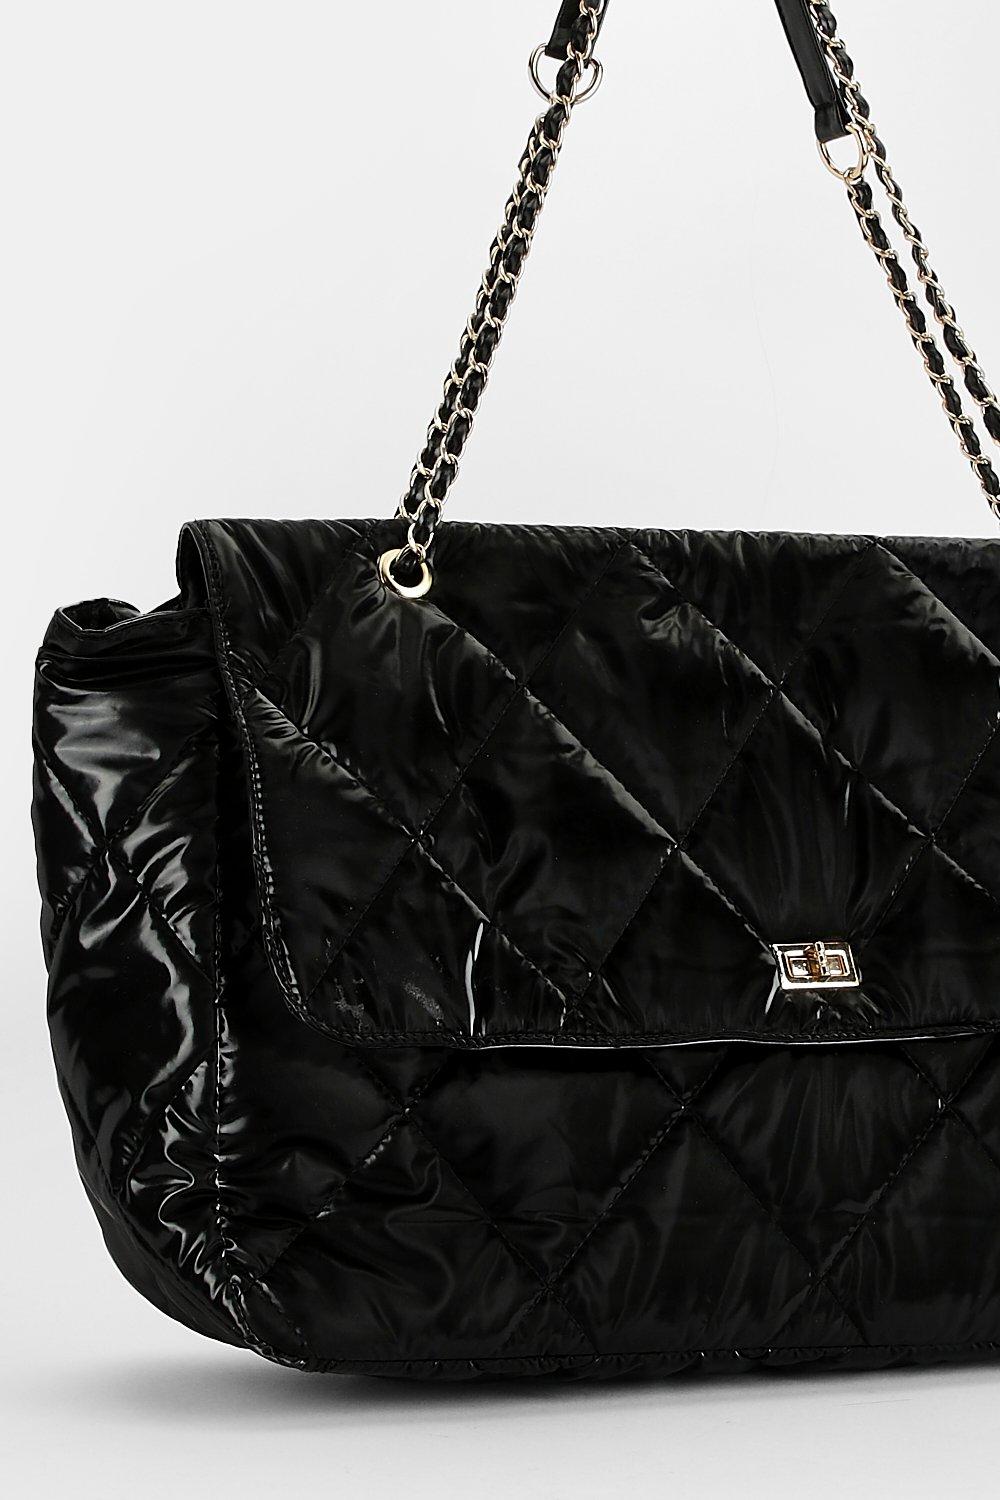 chanel extra large bag